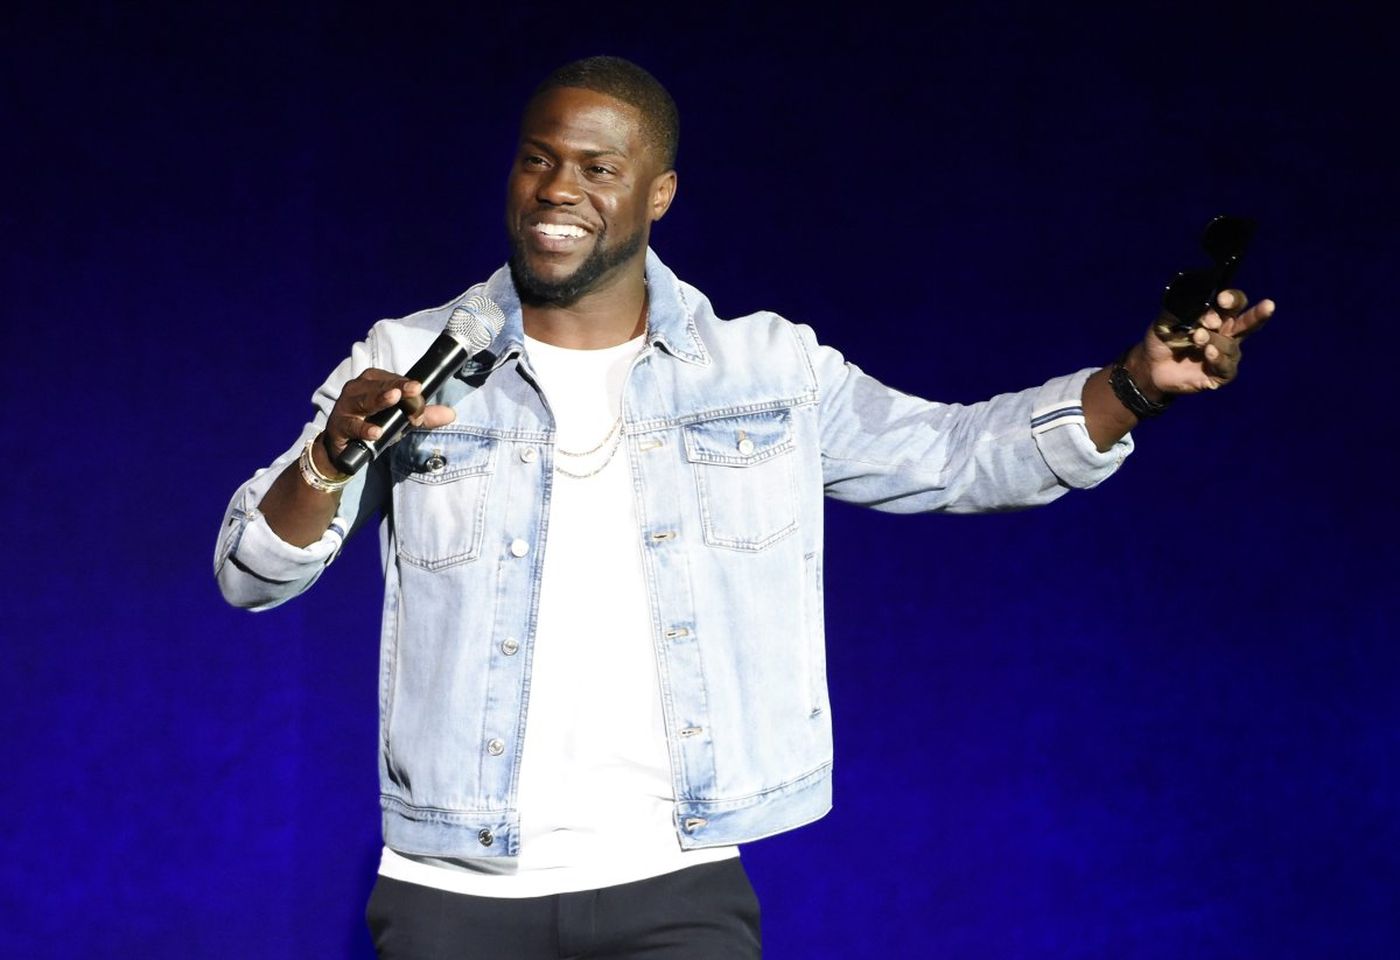 We Know the Name of Your Next S.O. Based on the Male Celebs You Pick Kevin Hart